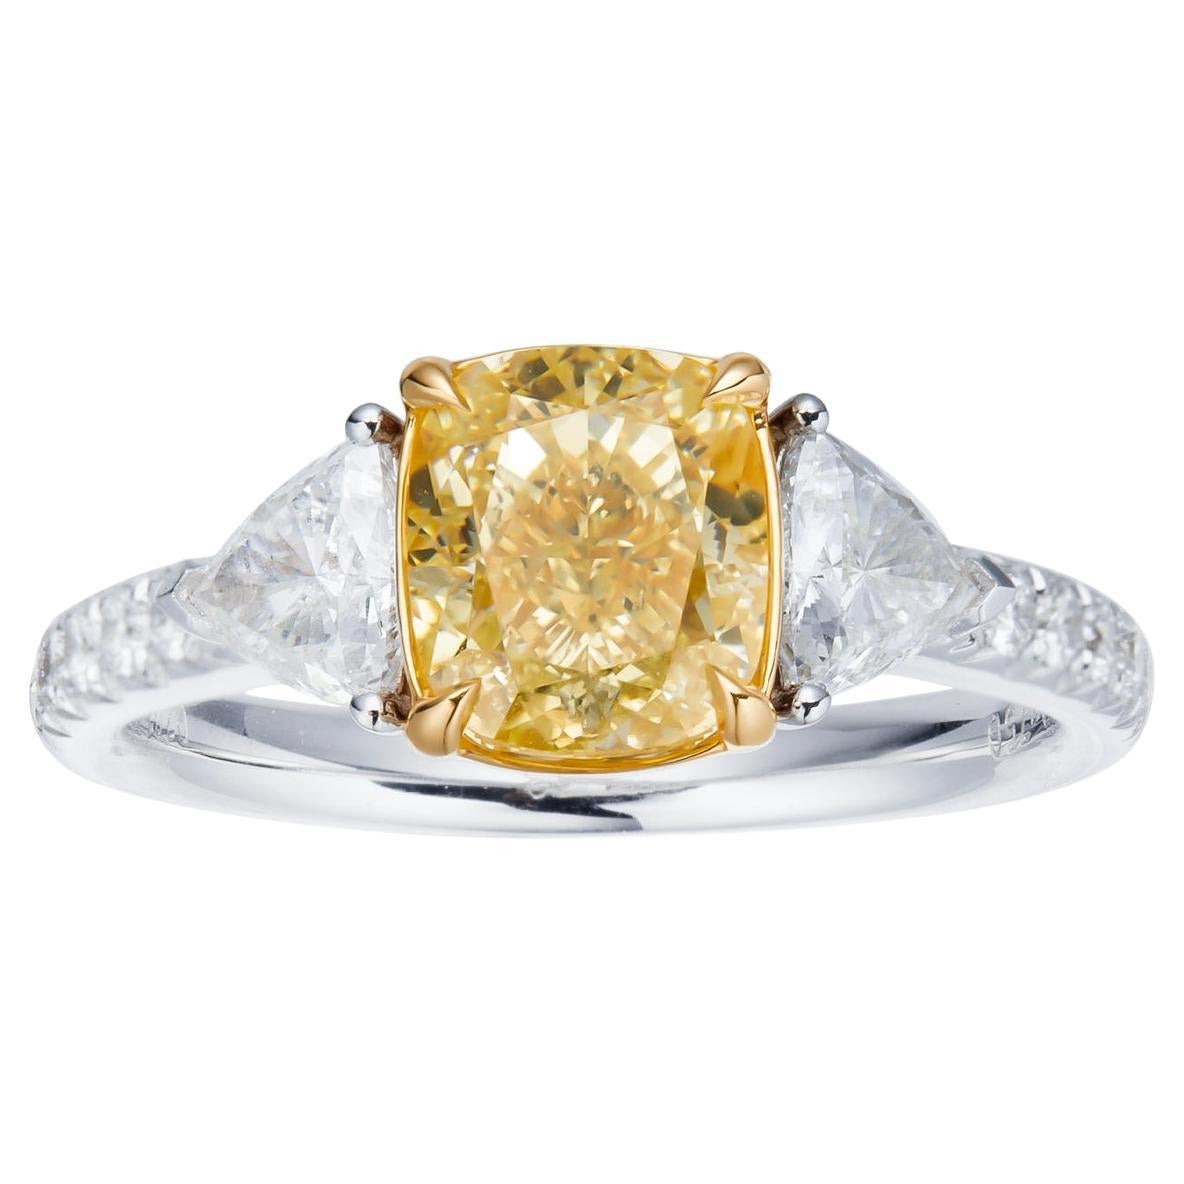 GIA Certified 2.03ct Cushion Cut Natural Fancy Light Yellow Diamond Ring 18KT. For Sale